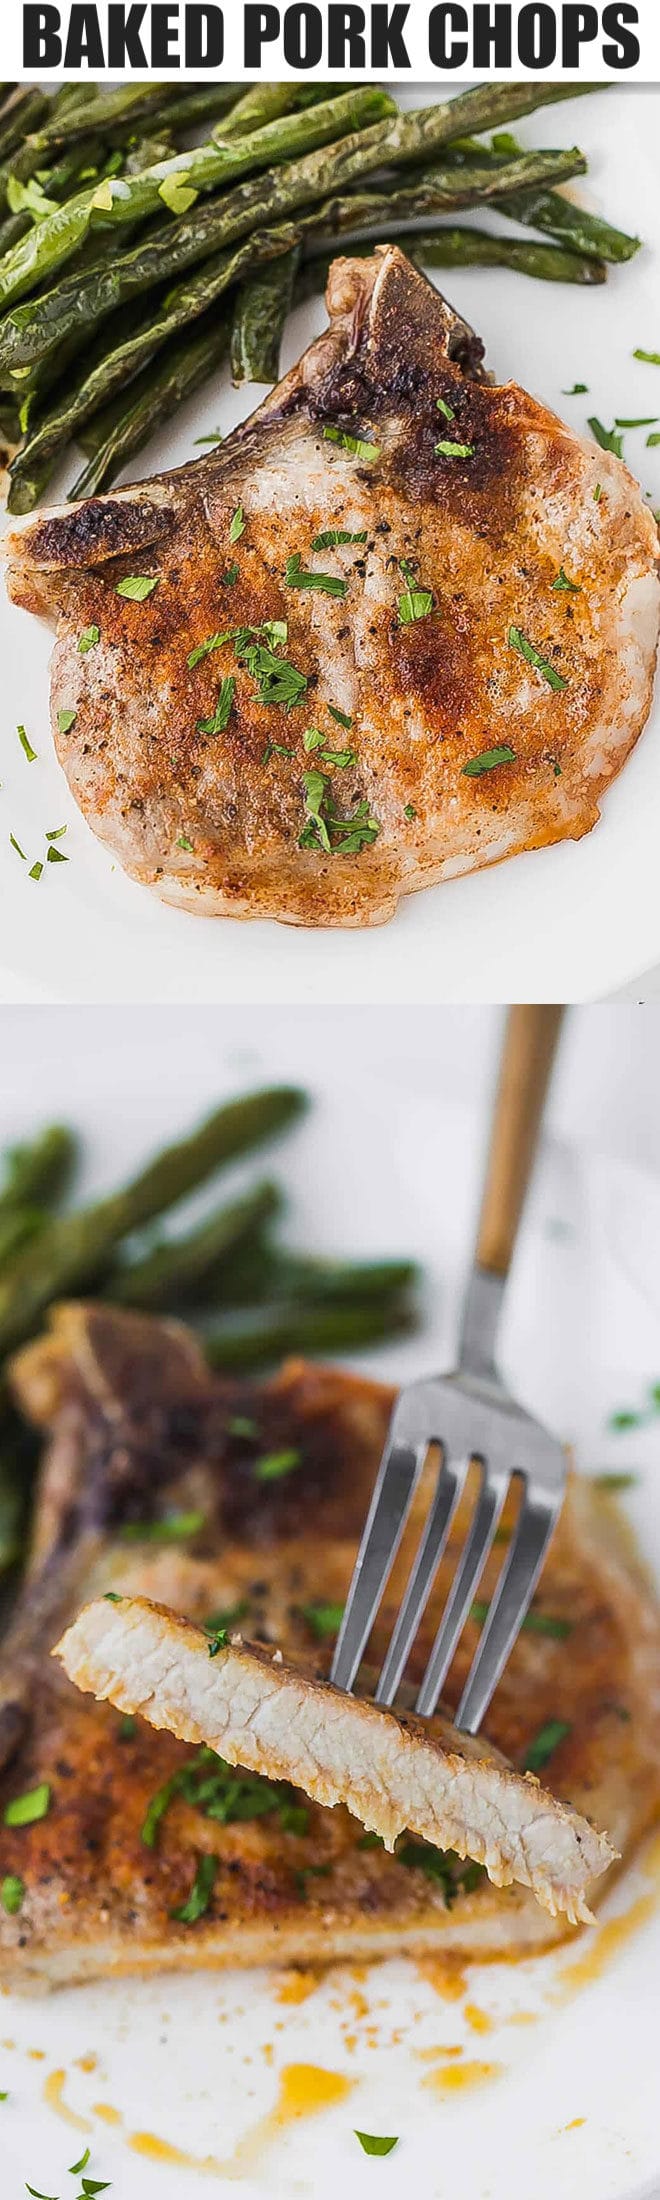 baked pork chops on a white plate